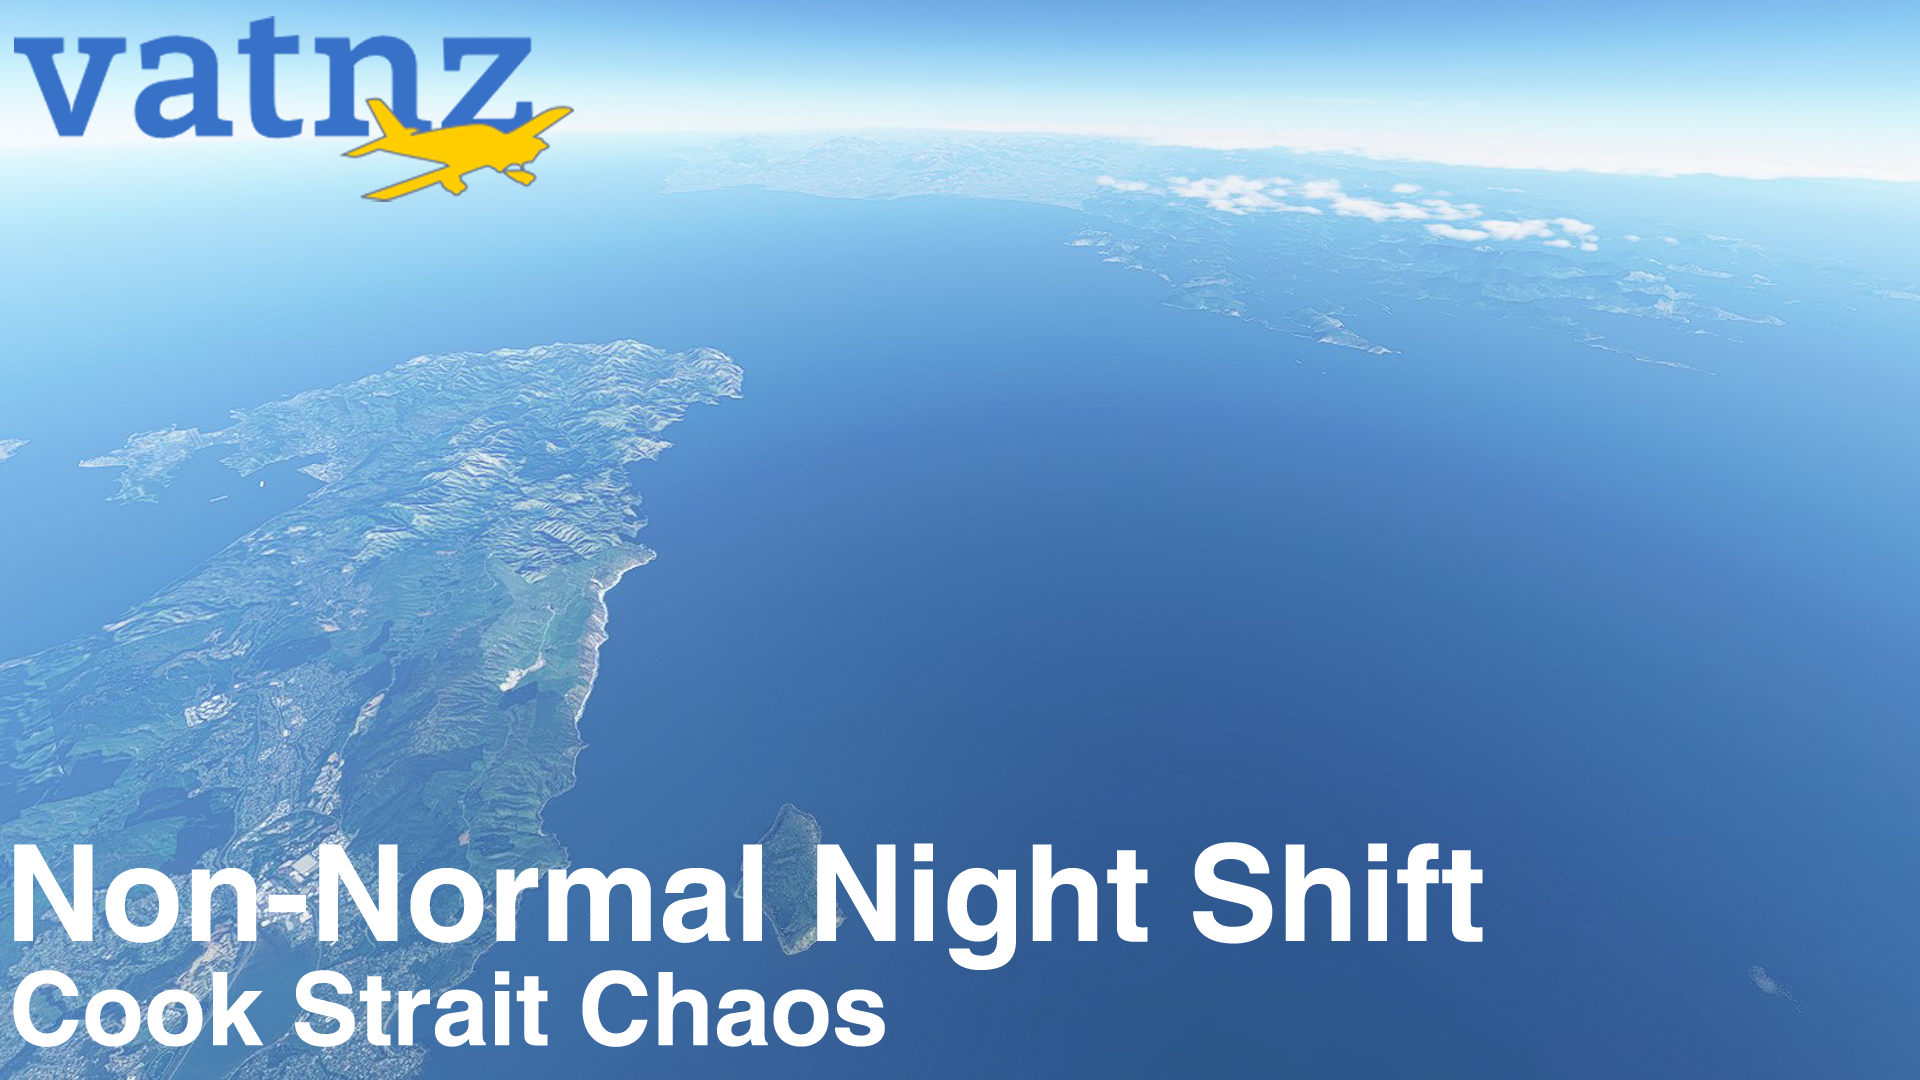 Non-Normal Night Shift - Cook Strait Chaos